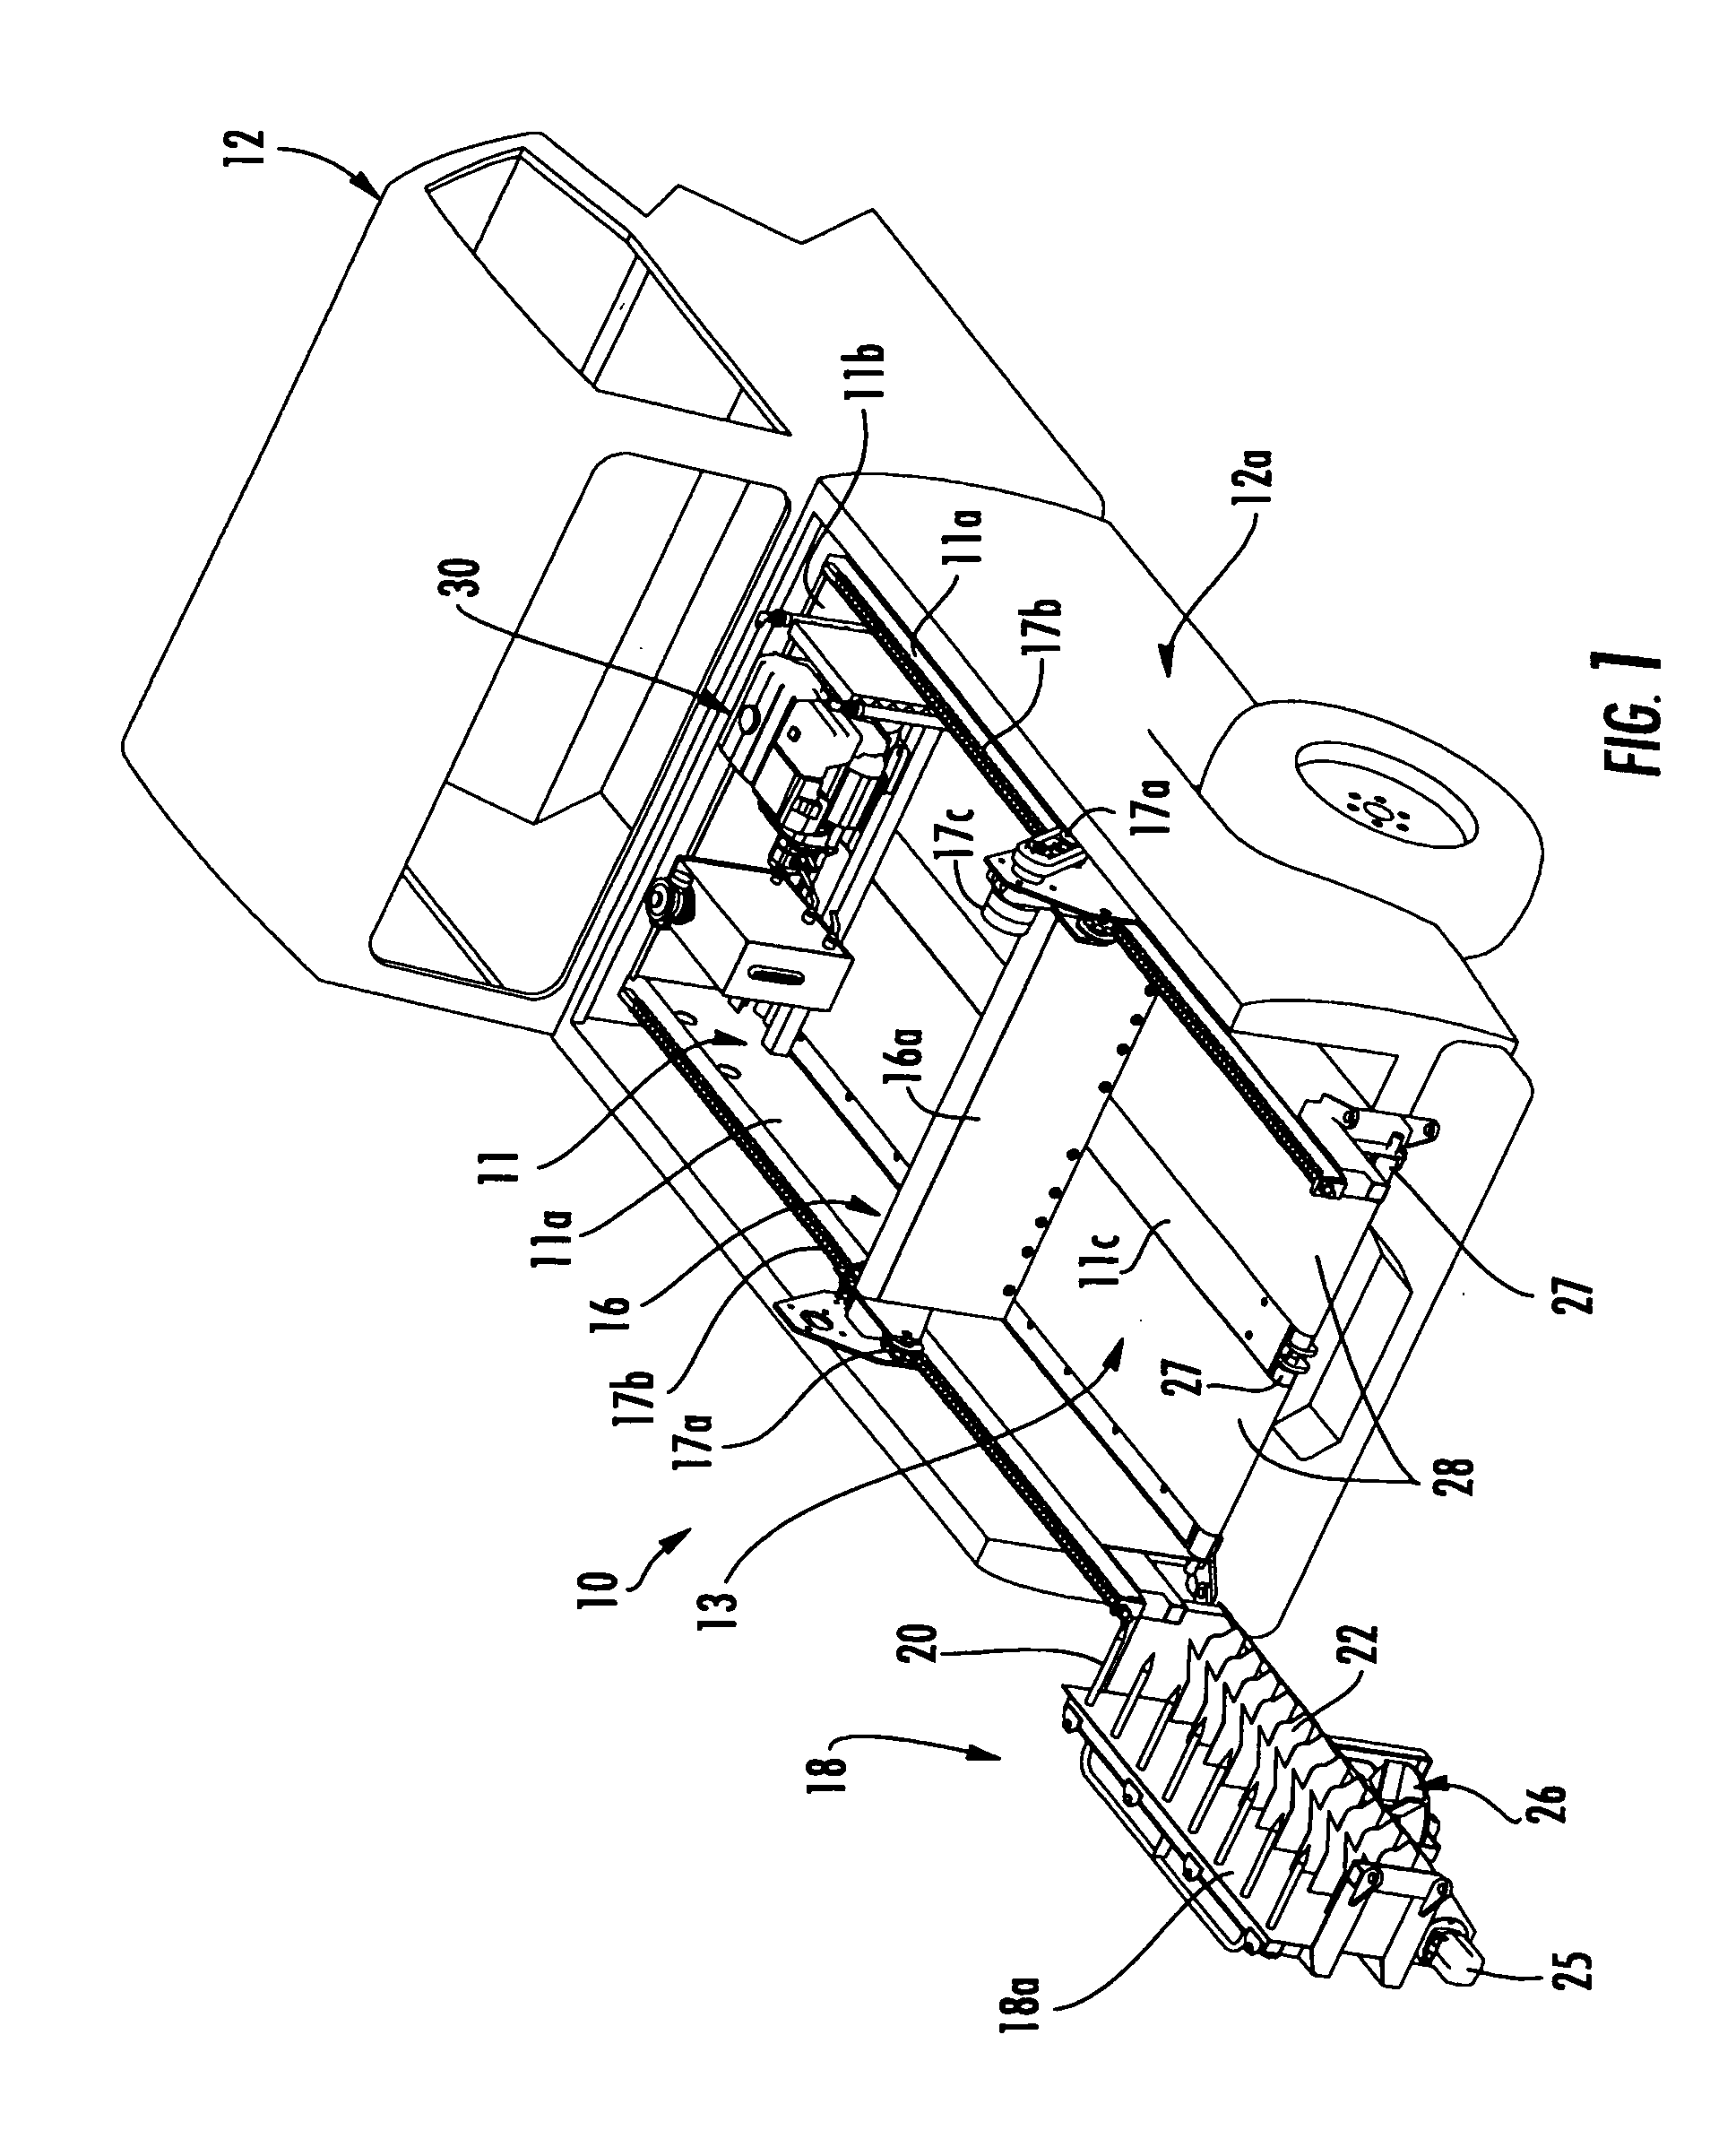 Material spreading device